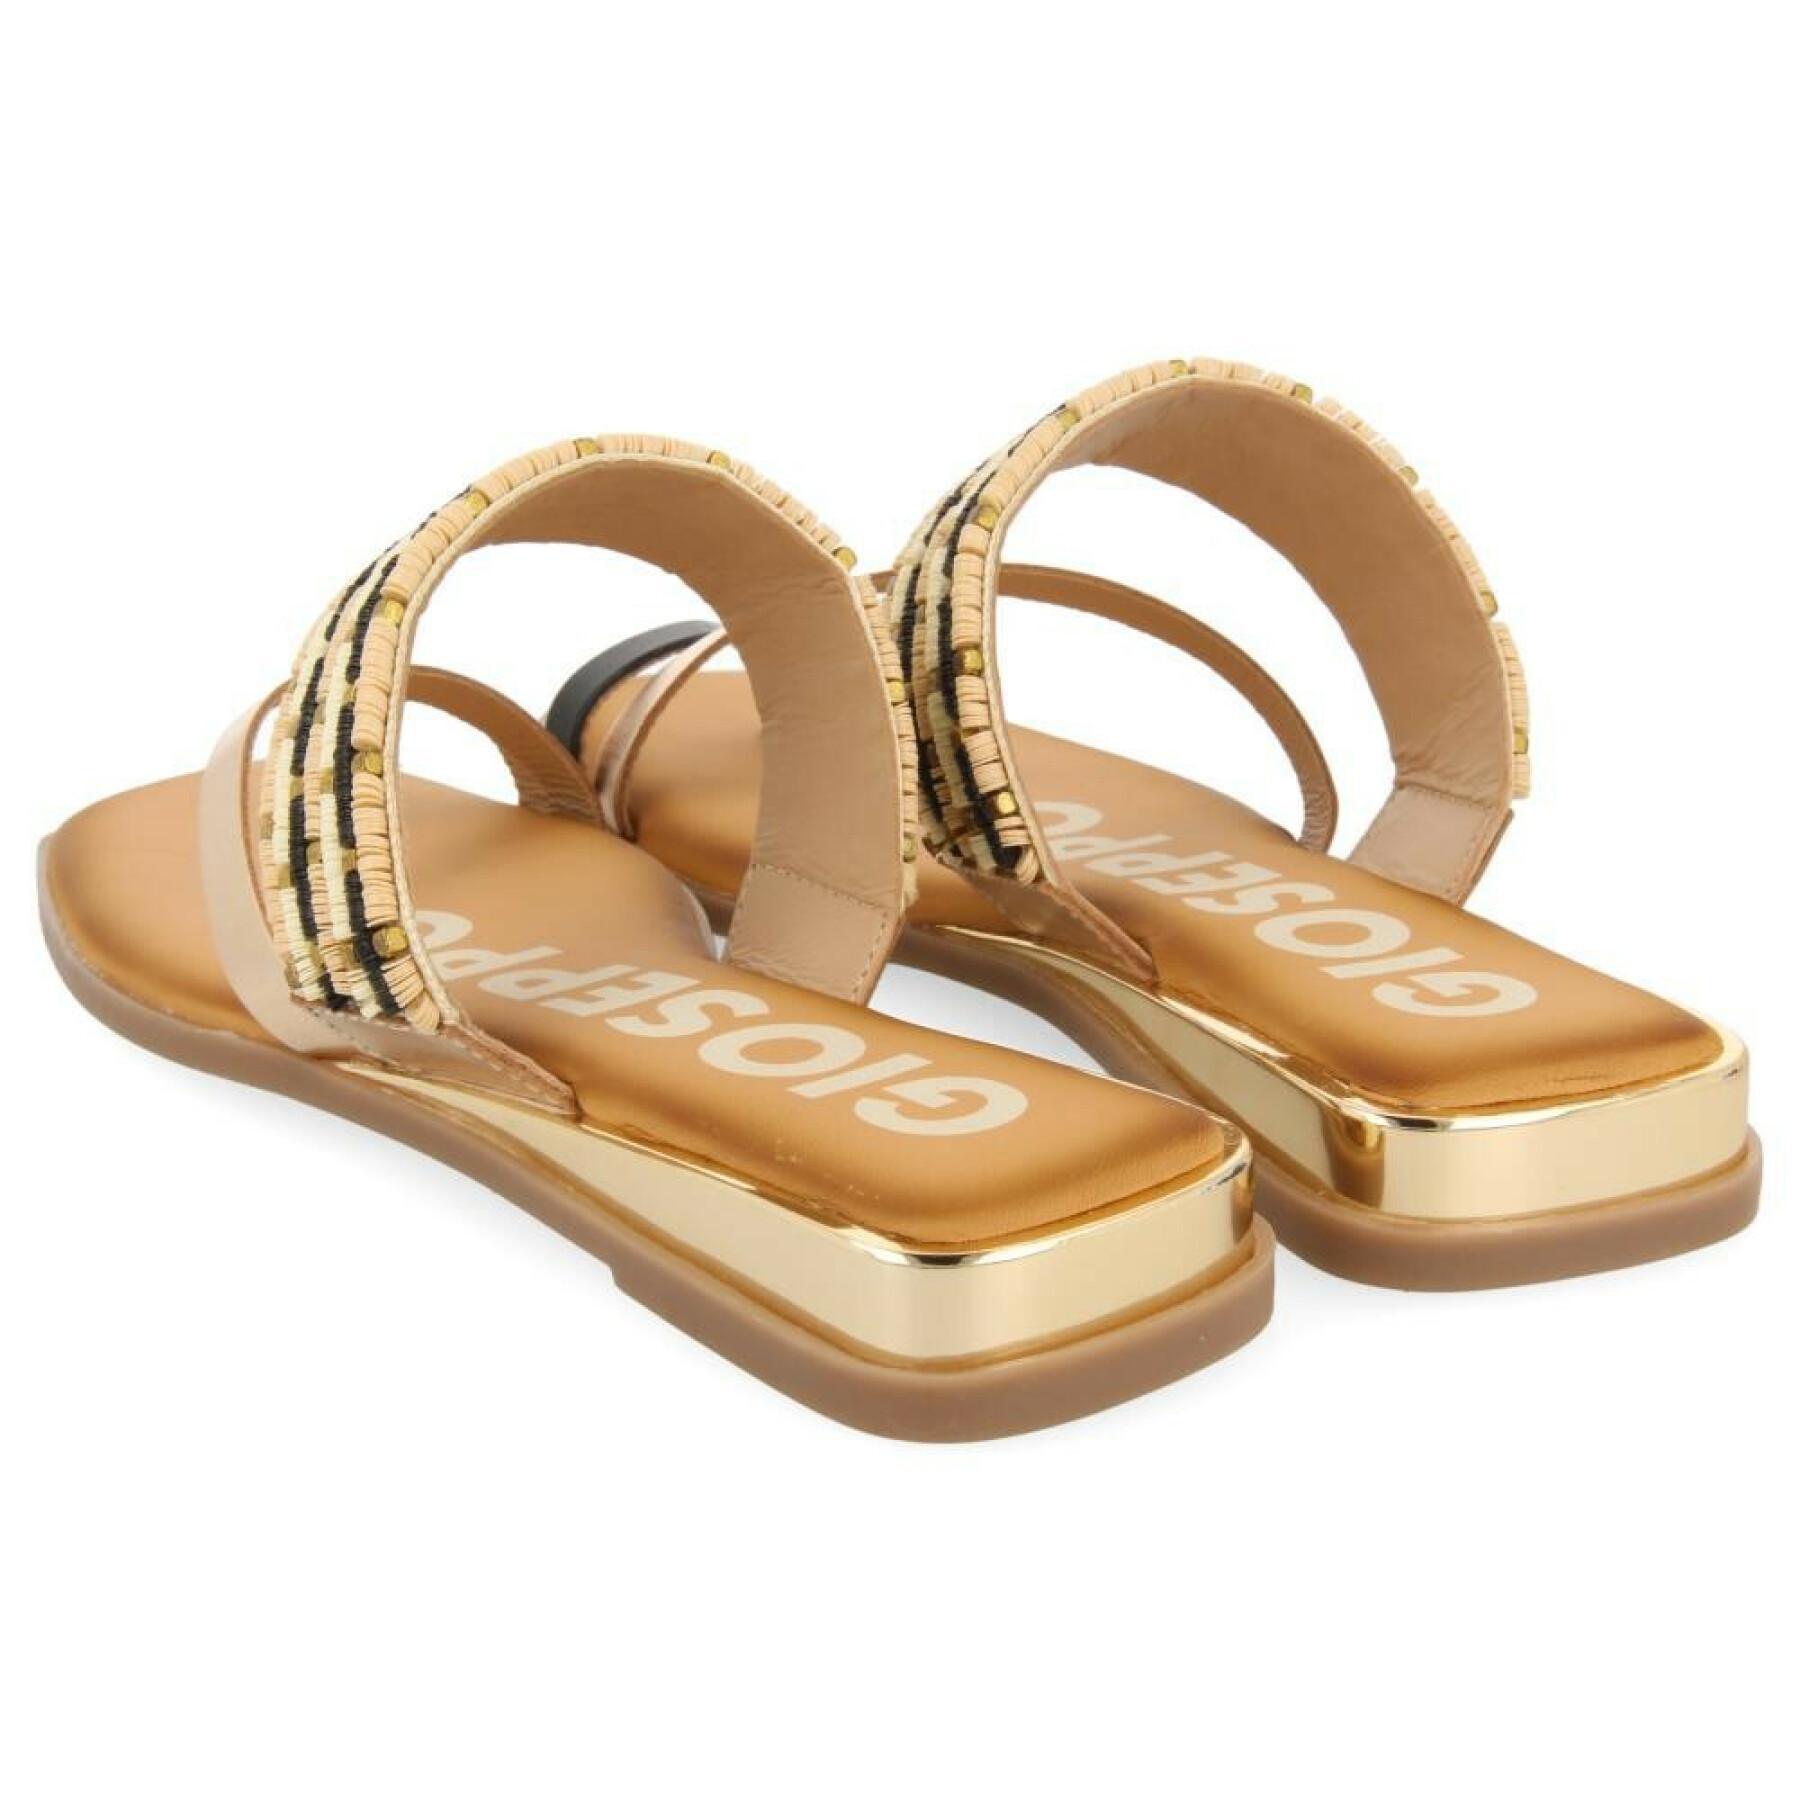 Women's nude sandals Gioseppo Cottle